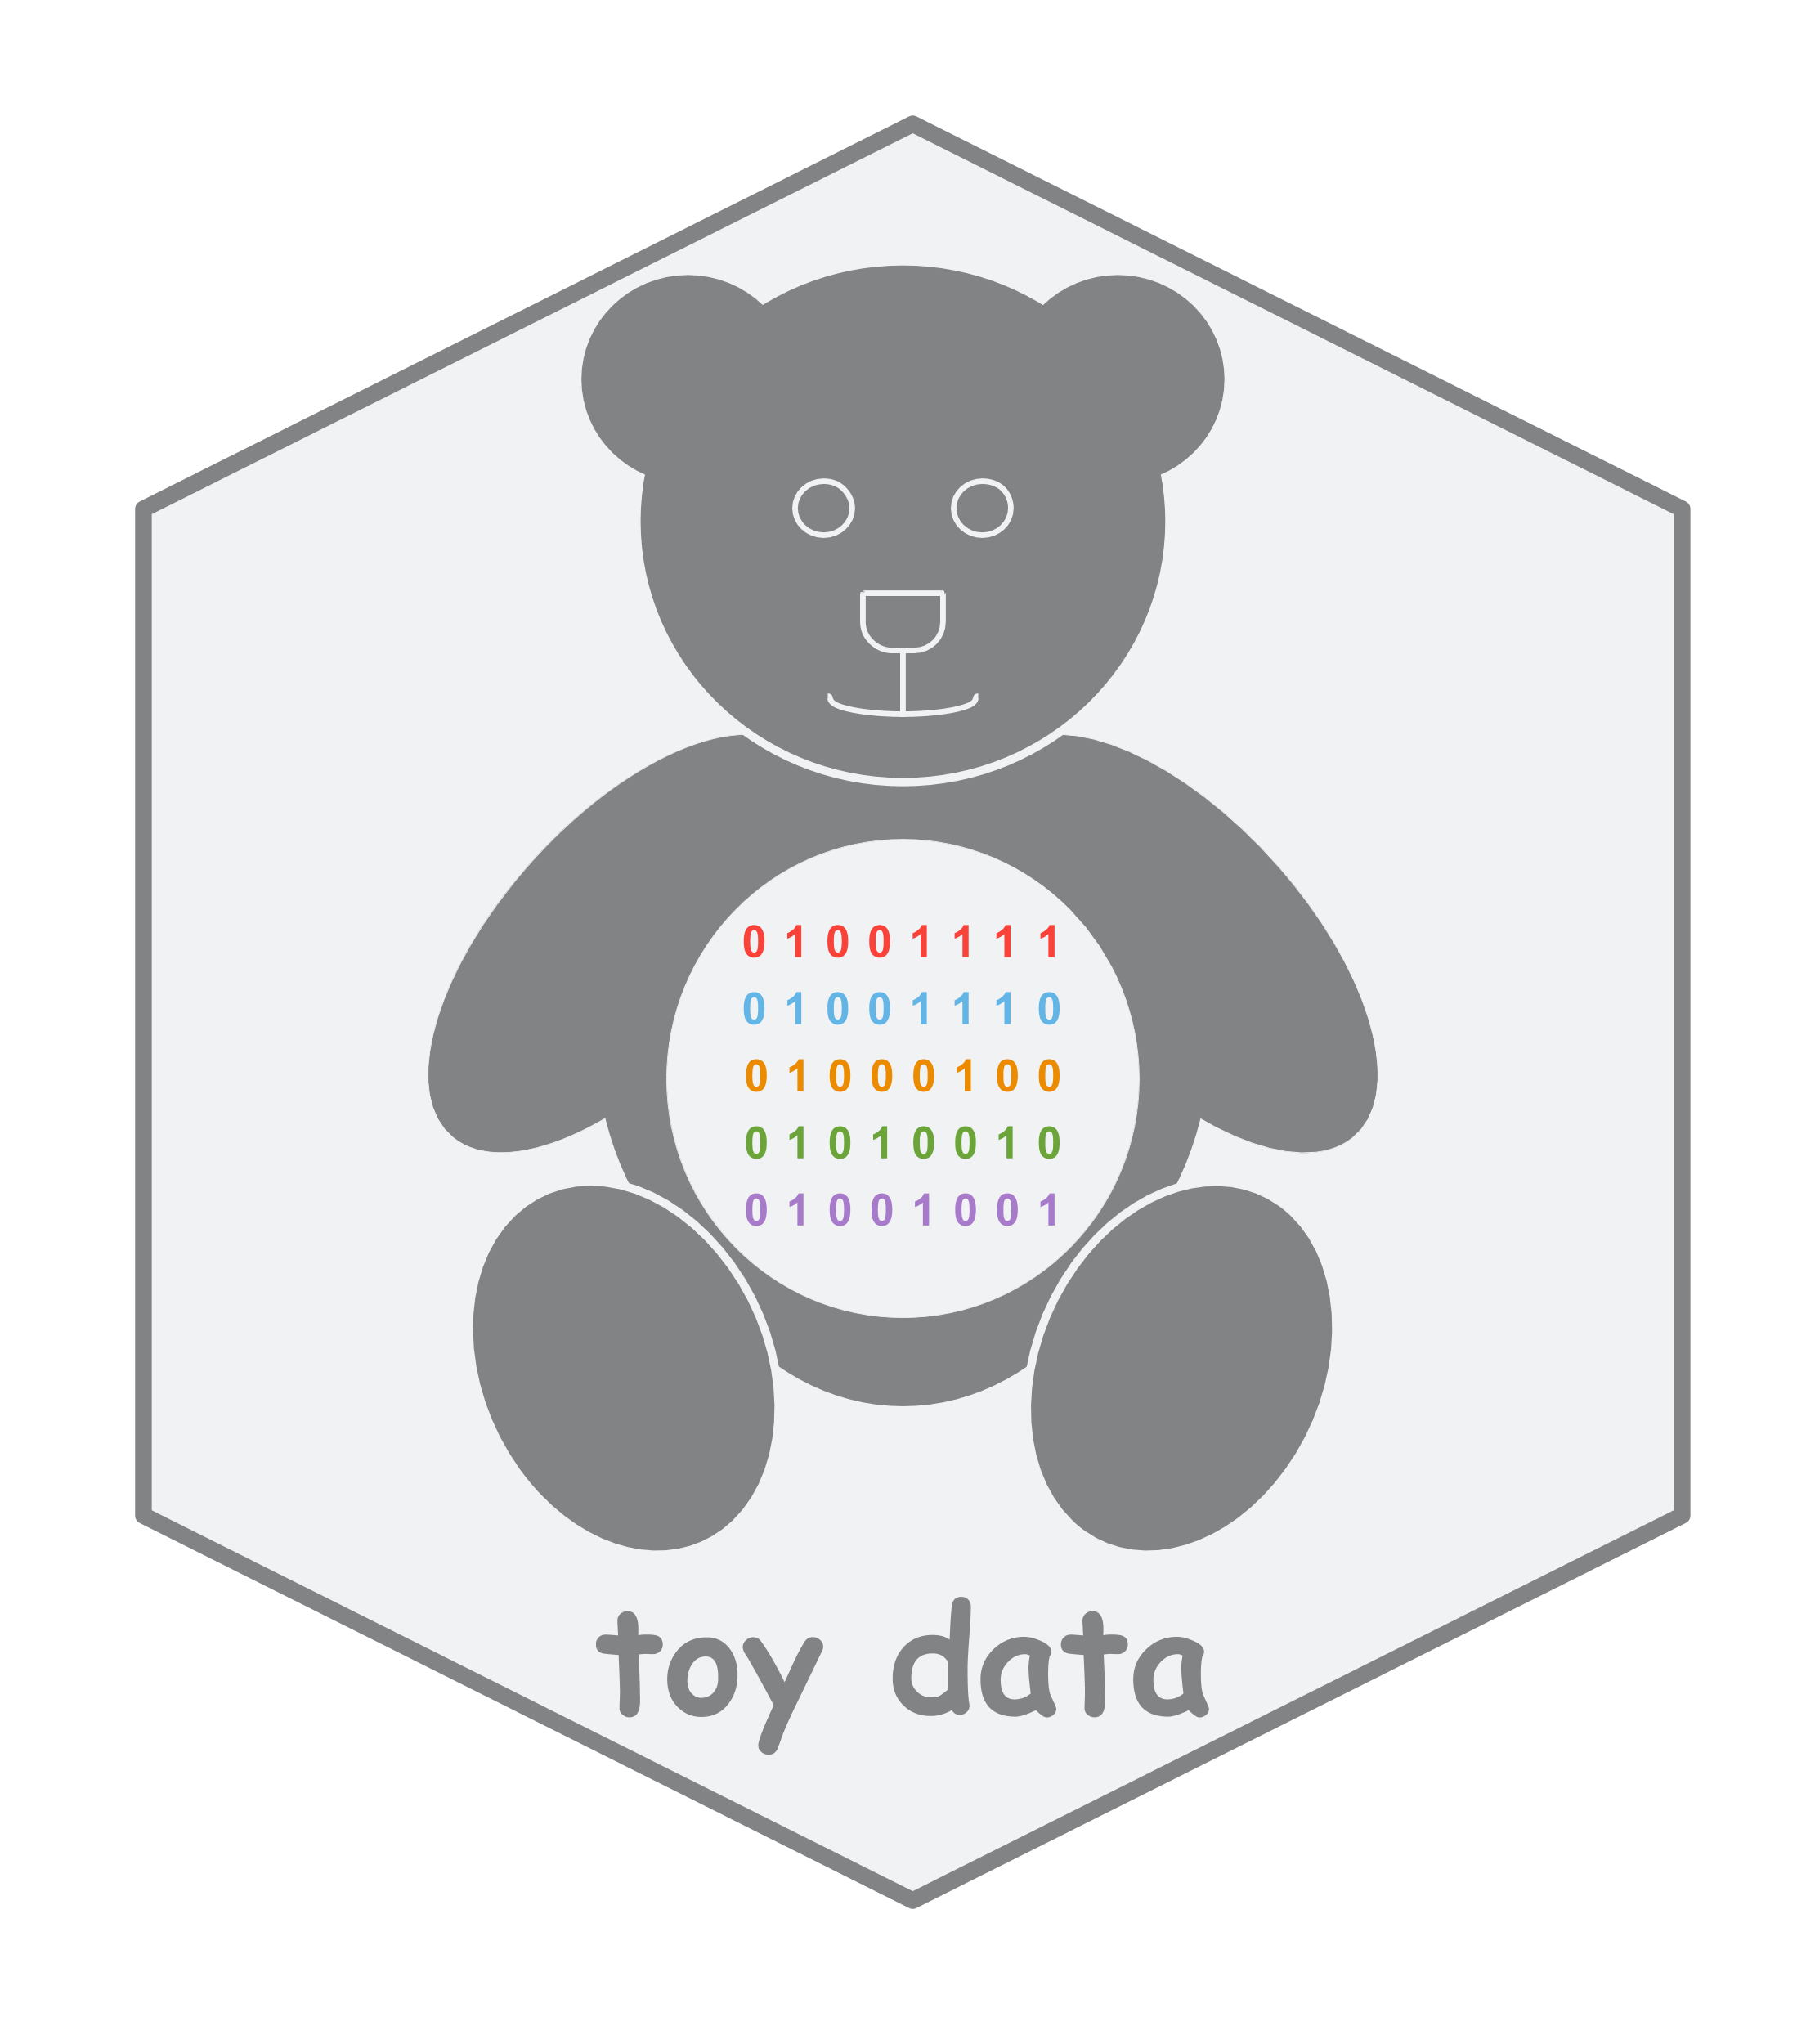 toy_data_hex.png